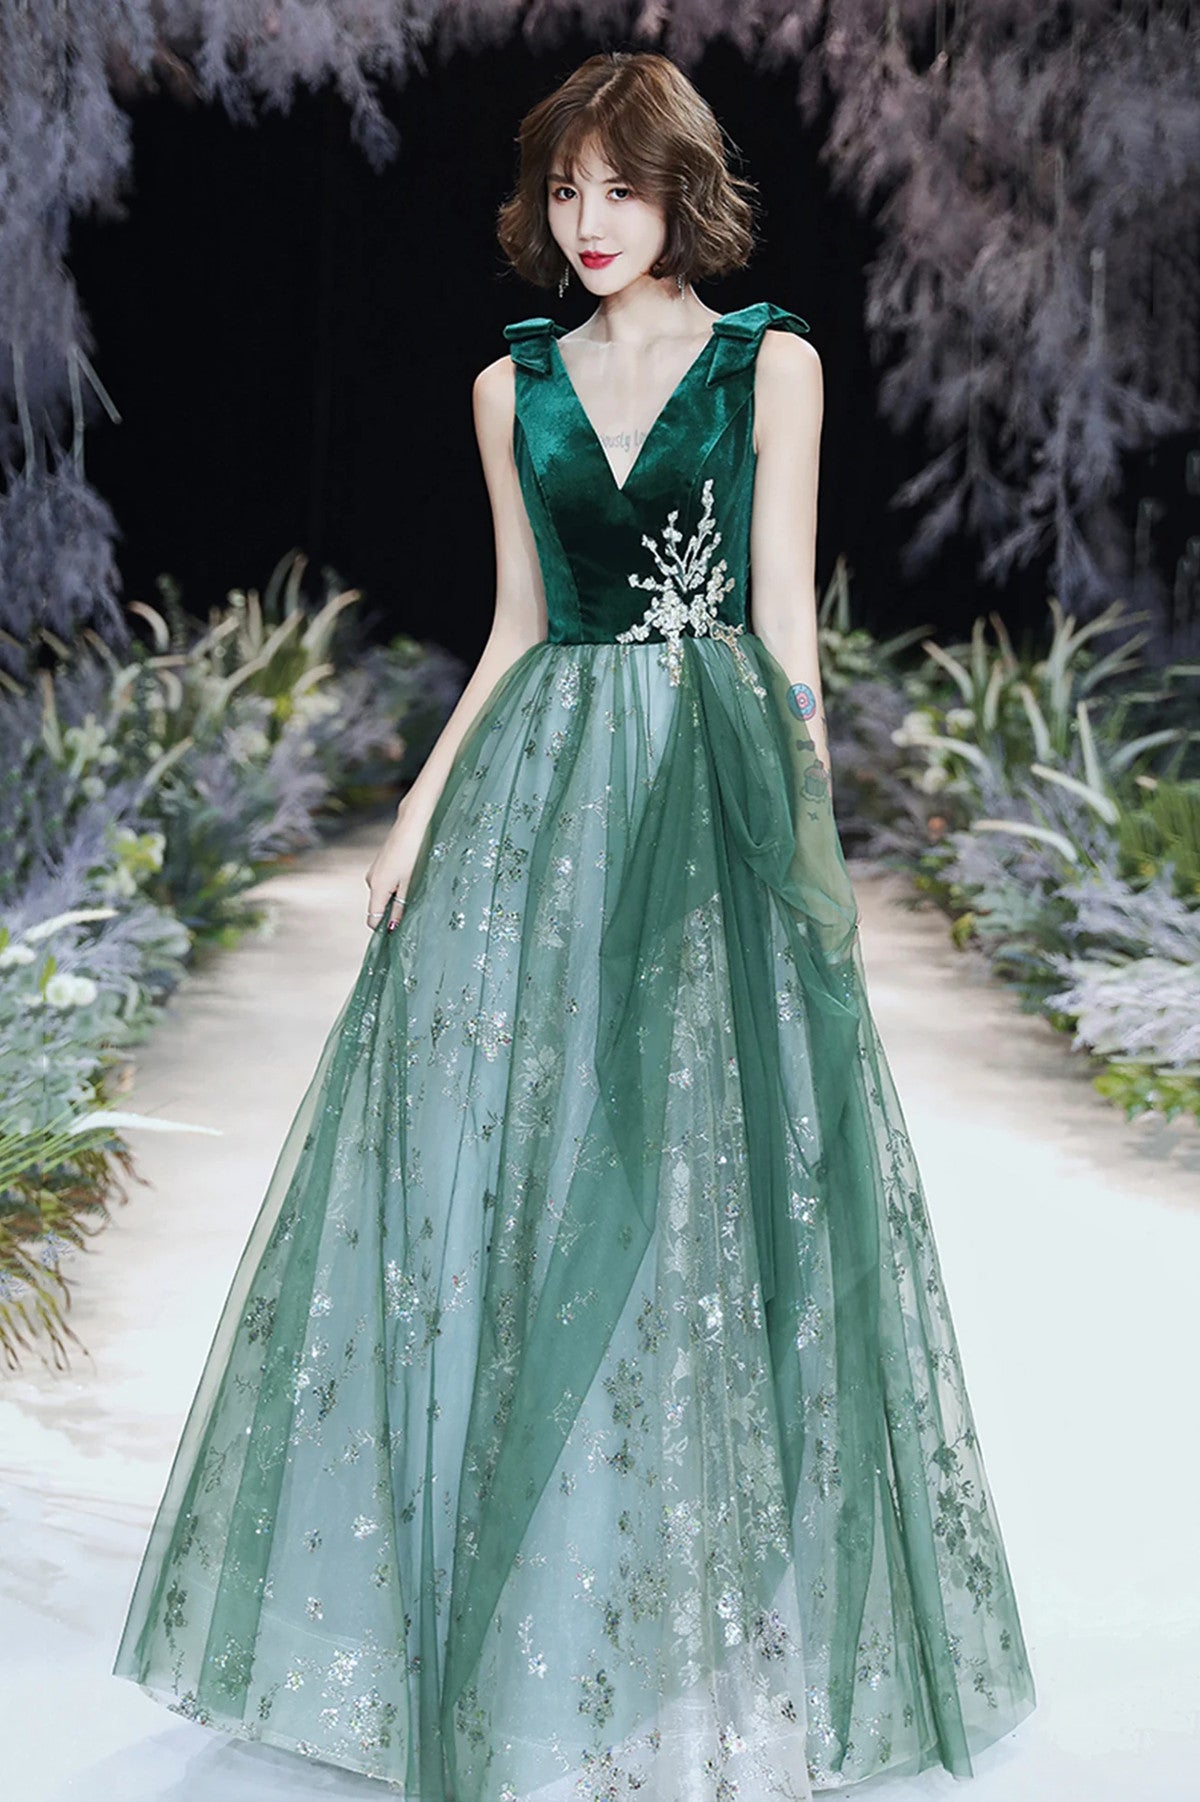 A-line Green Tulle and Velvet Long Formal Dress, Green Tulle Party Dress Prom Dress